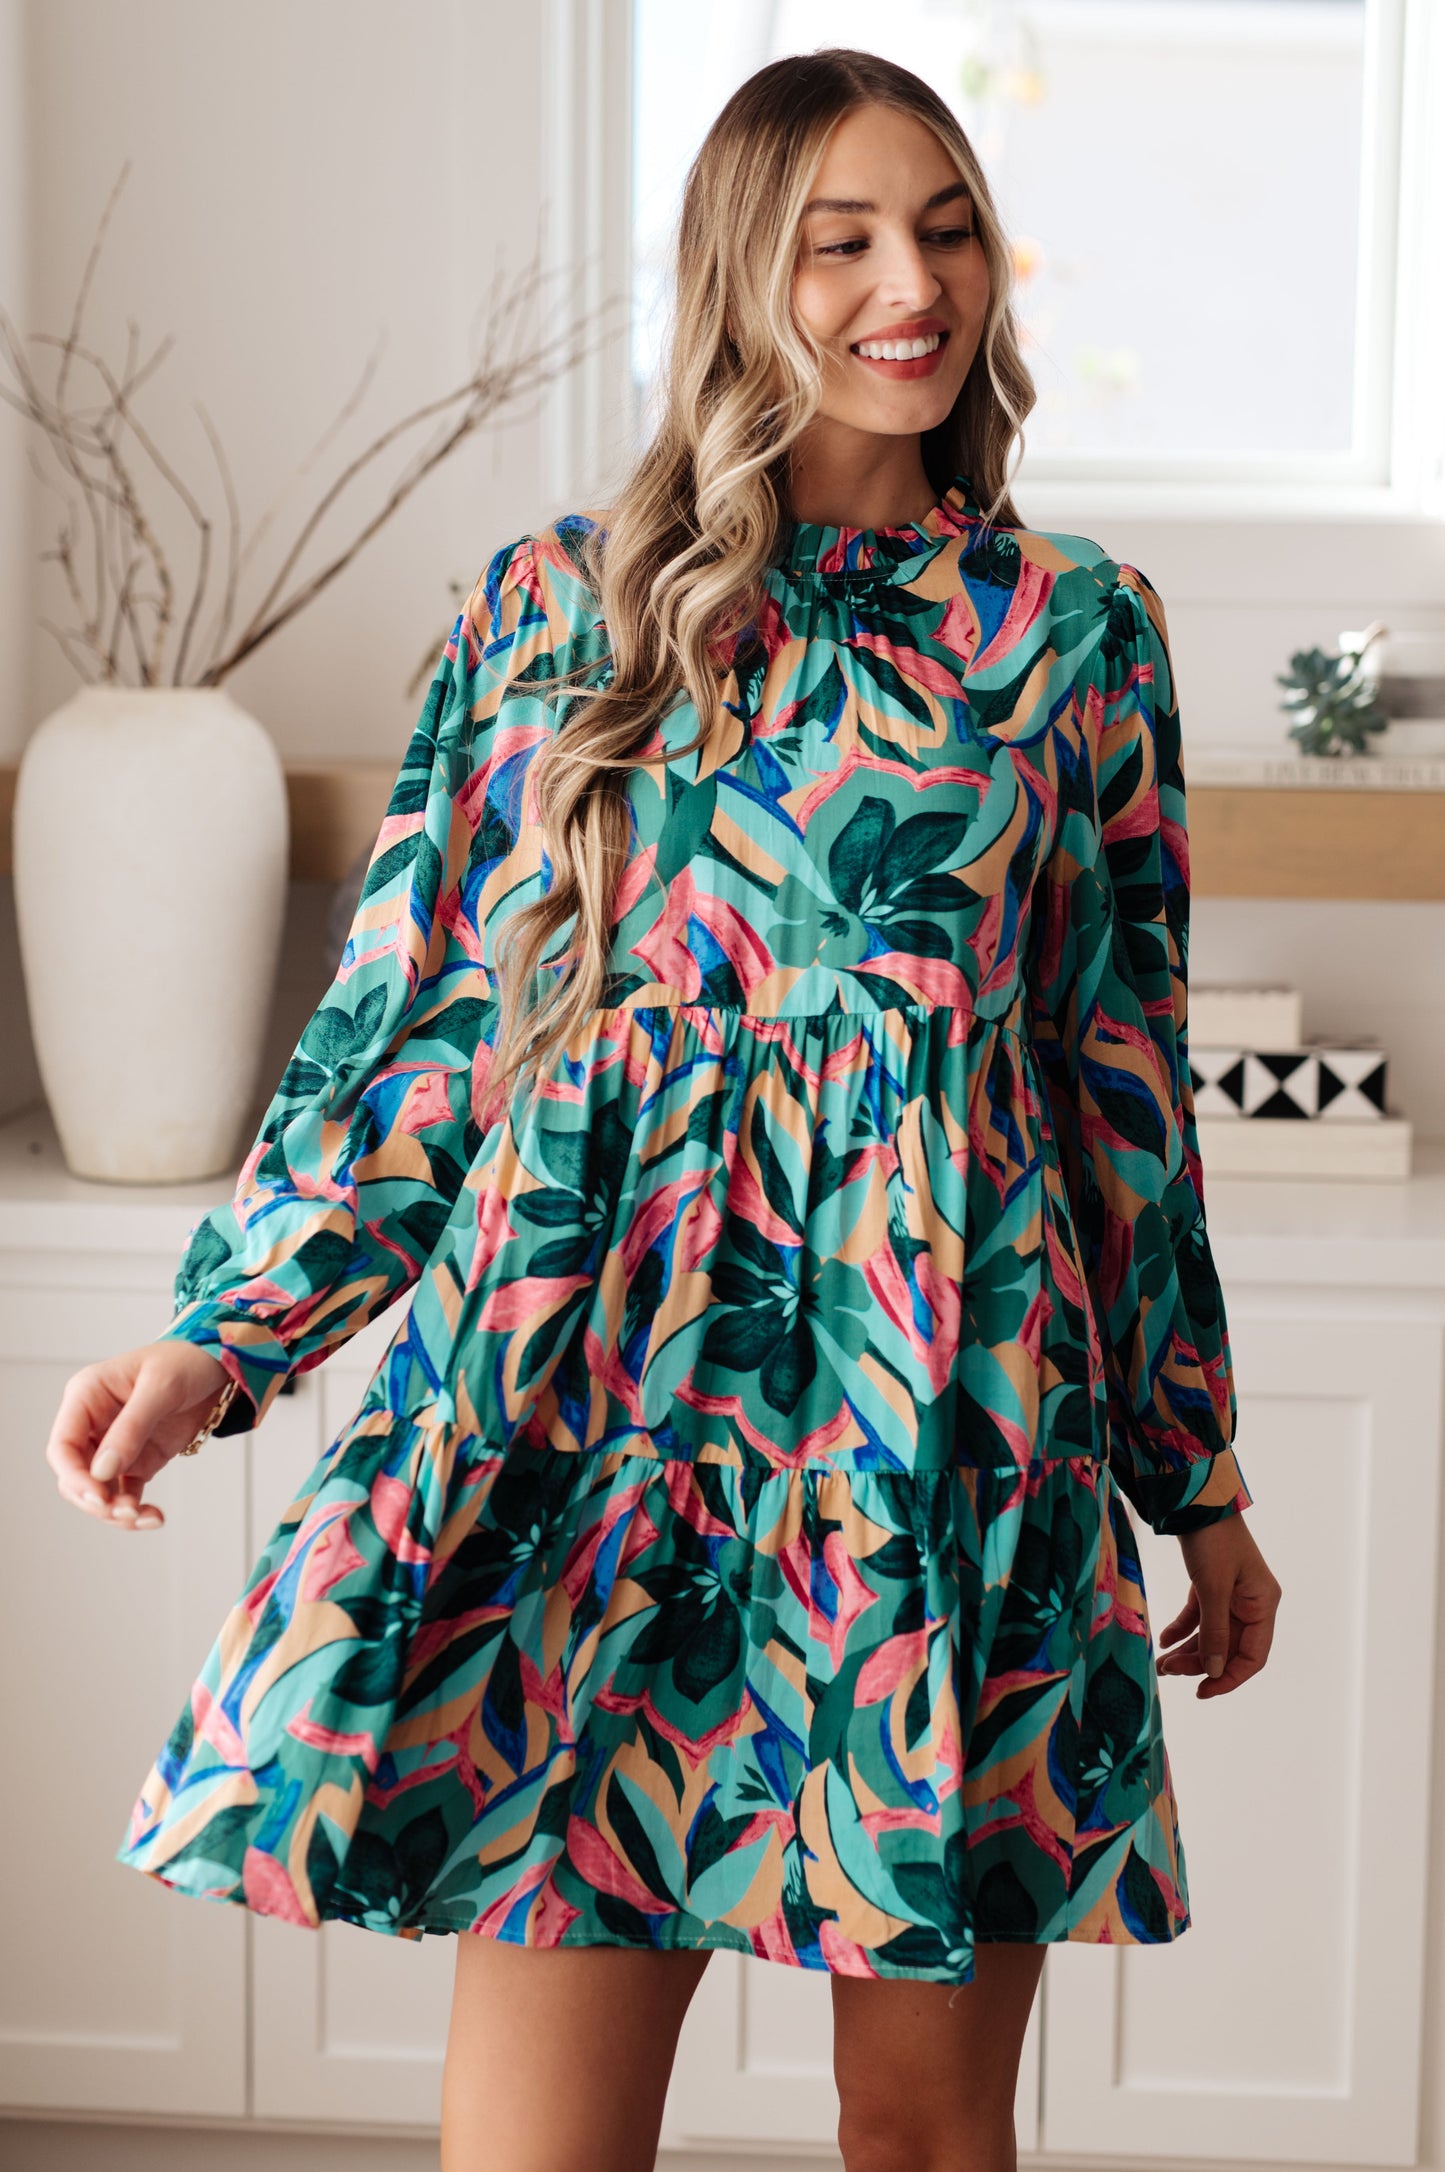 Thrill of it All Floral Dress - FamFancy Boutique